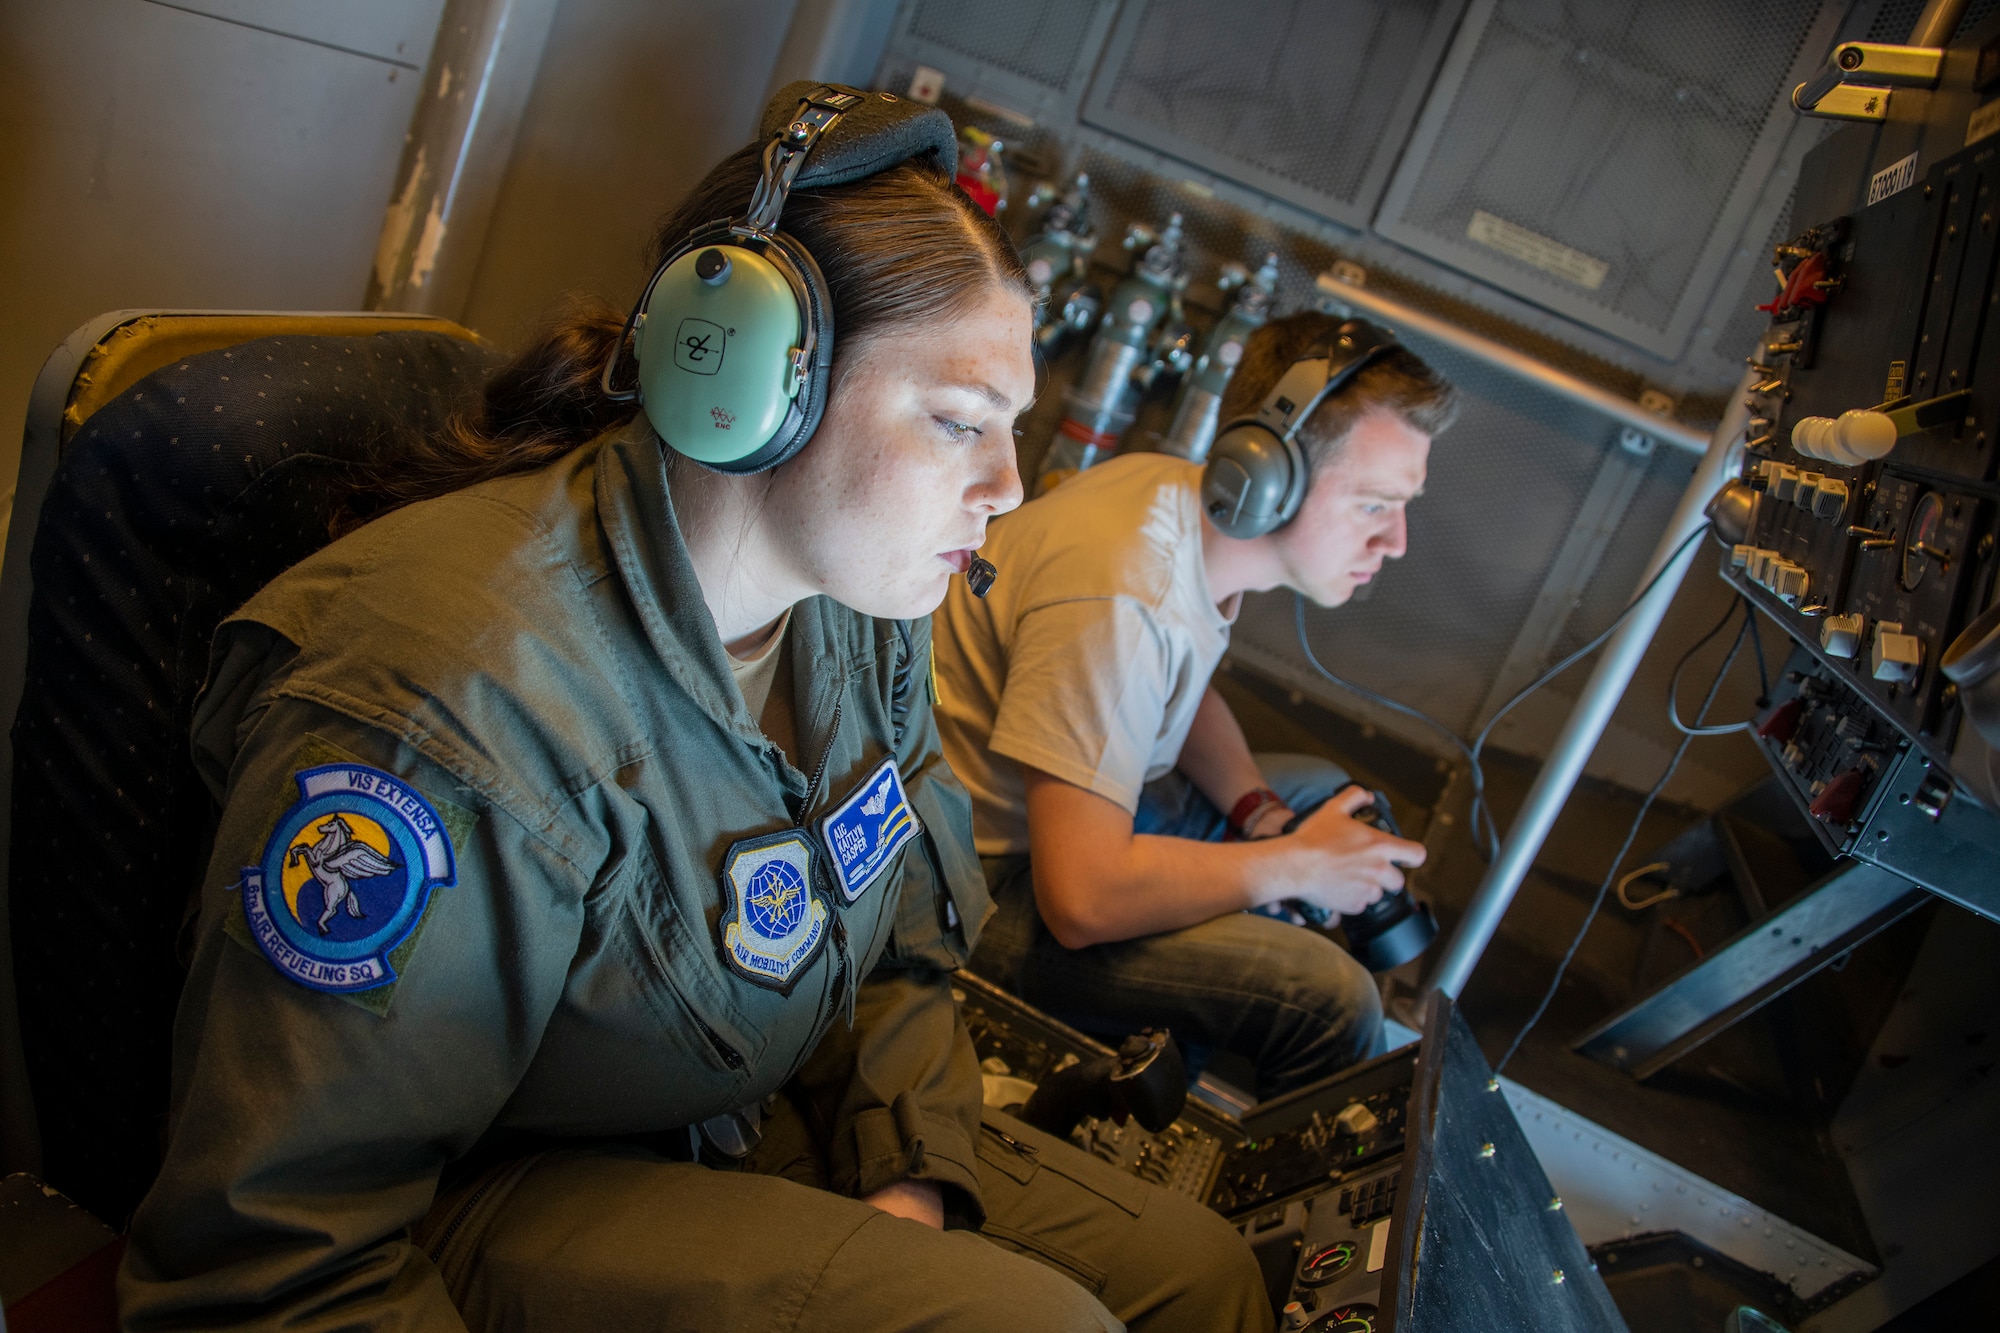 U.S. Air Force Airman 1st Class Kaitlyn Casper, left, 6th Air Refueling Squadron in-flight refueling specialist, waits for an approaching aircraft to maneuver into position to be refueled while aviation photojournalist Matthew Mansell, was on board documenting the operation during the Women’s History Month heritage flight at Travis Air Force Base, California, March 22, 2022.  The remarkable ability of aircraft to be refueled while still in flight depends on the skills of in-flight refueling personnel, more commonly known as boom operators. In honor of Women's History Month, an all-female KC-10 flight crew from the 60th and 349th Air Mobility Wings flew on an aerial refueling training mission over California and Oregon. (U.S. Air Force photo by Heide Couch)